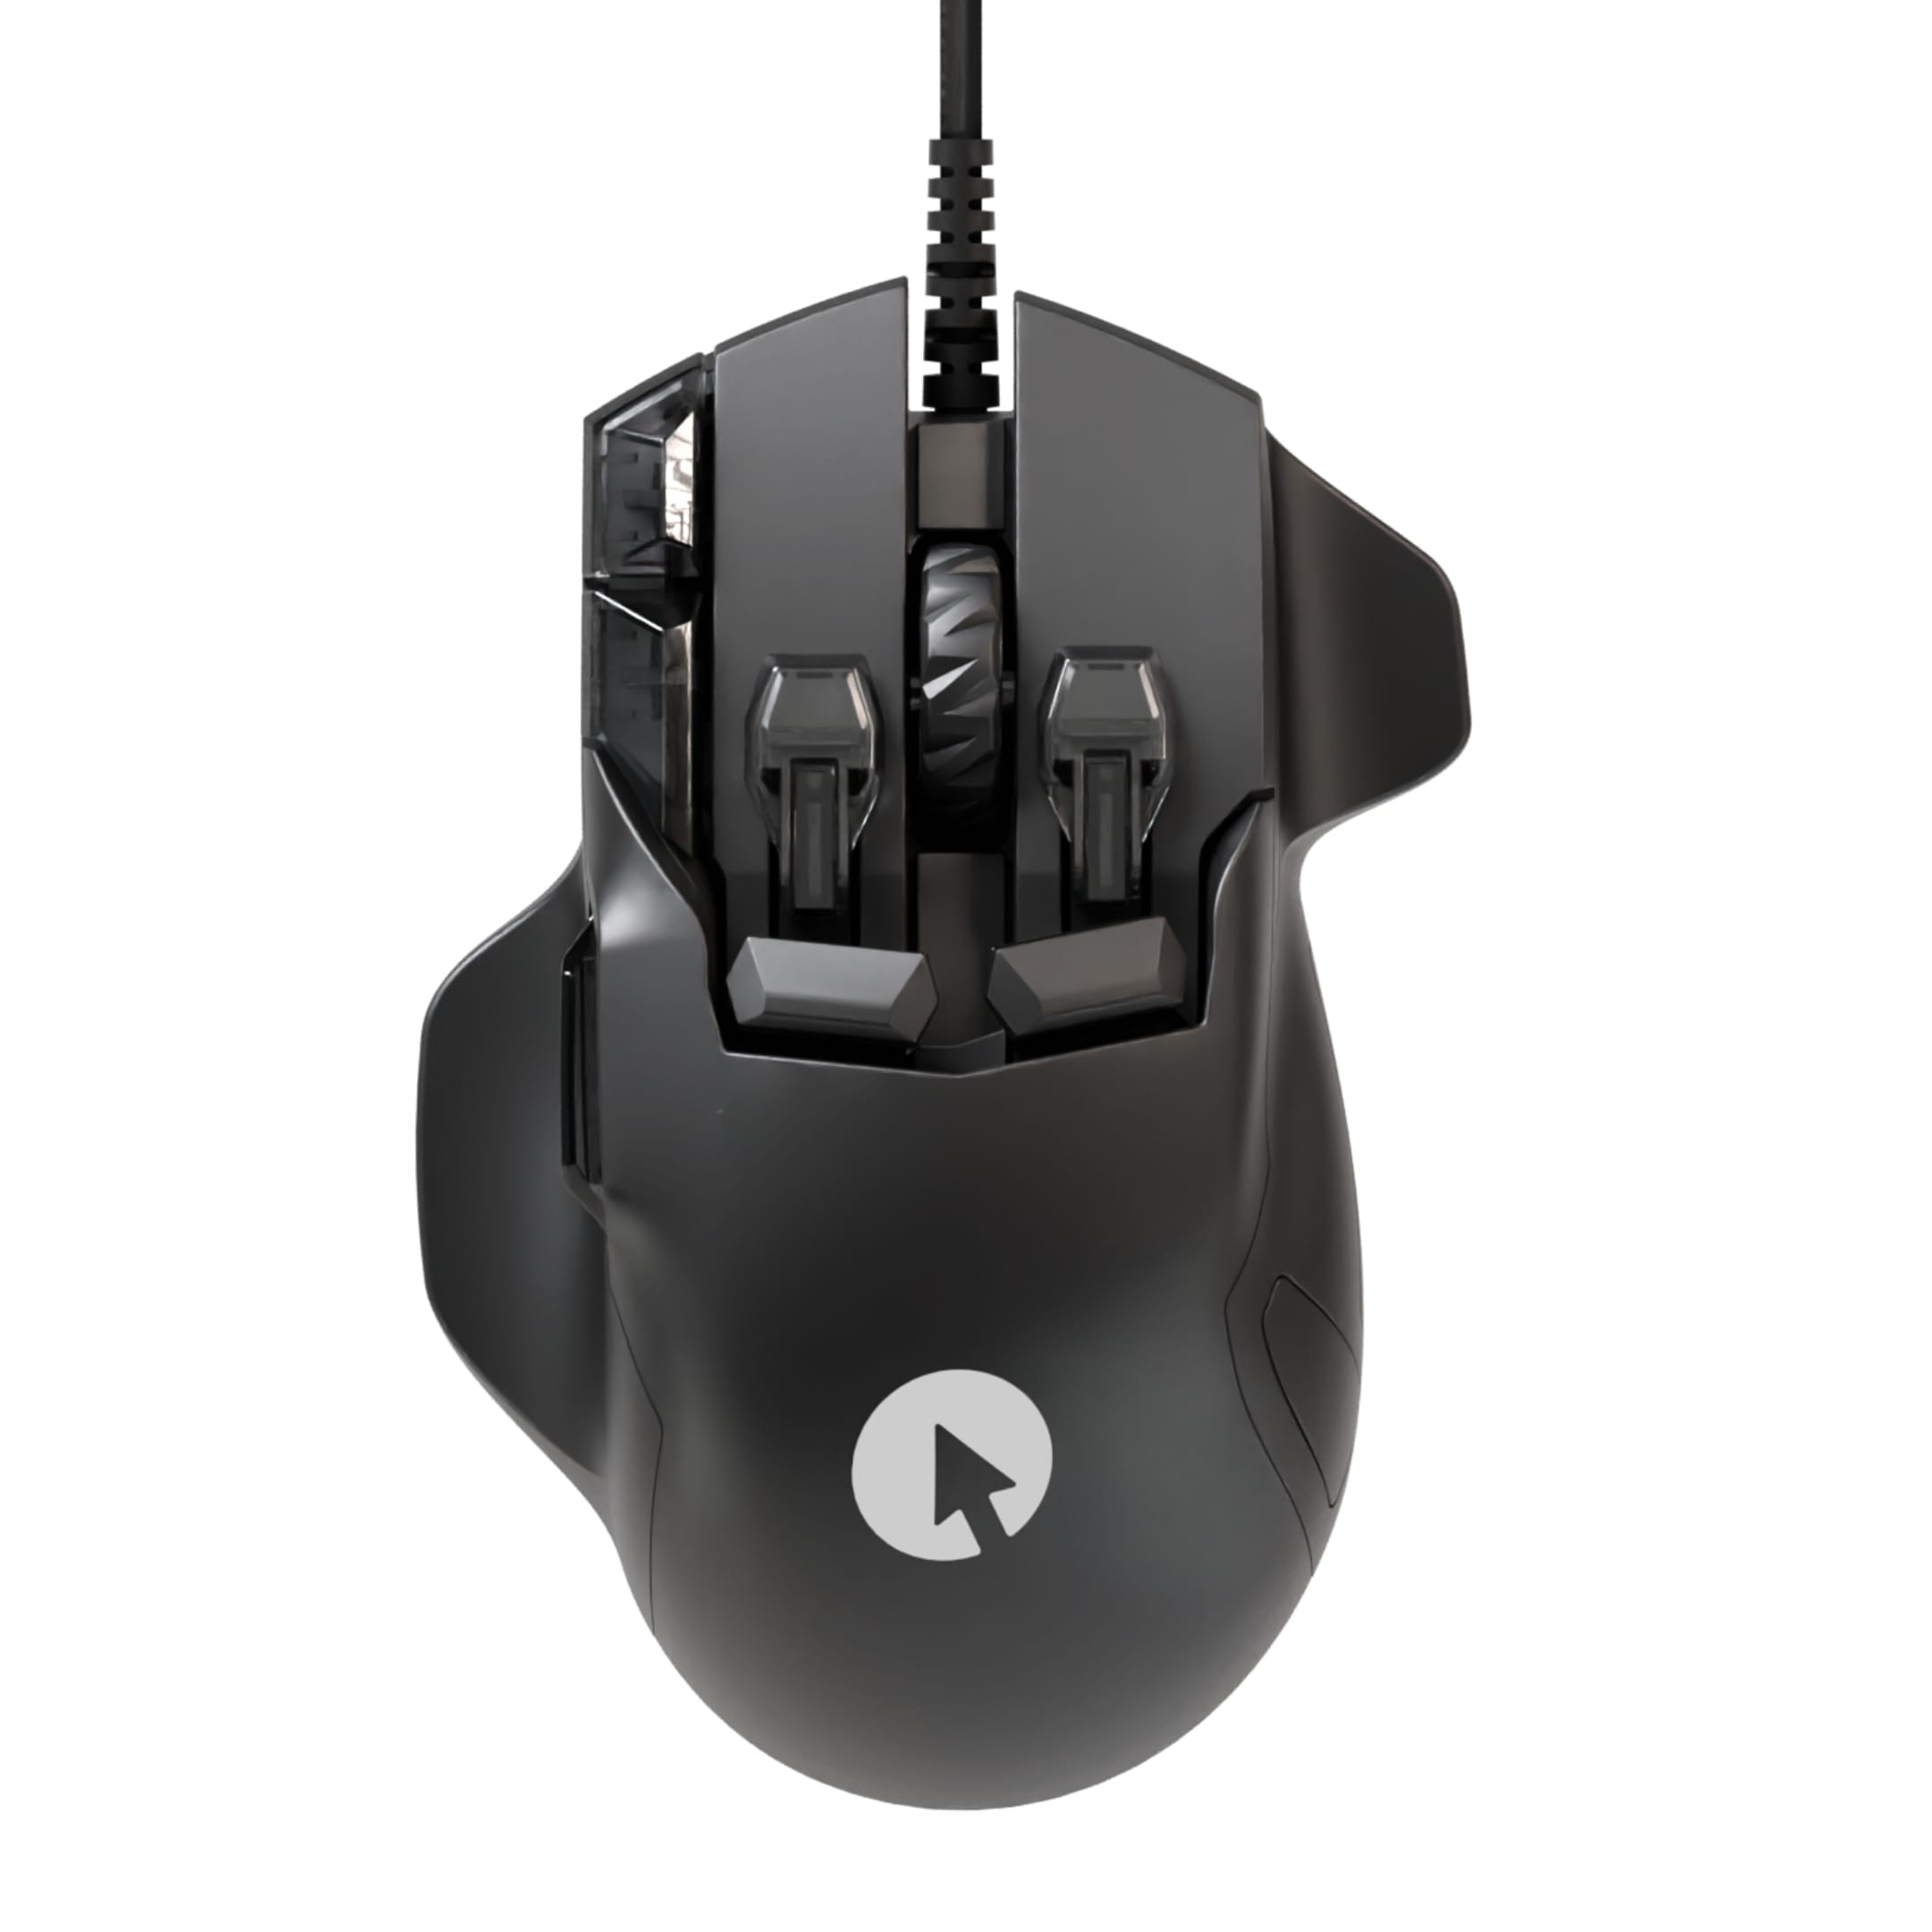 Why is EVERYONE Buying This Gaming Mouse? - Logitech G502 HERO 